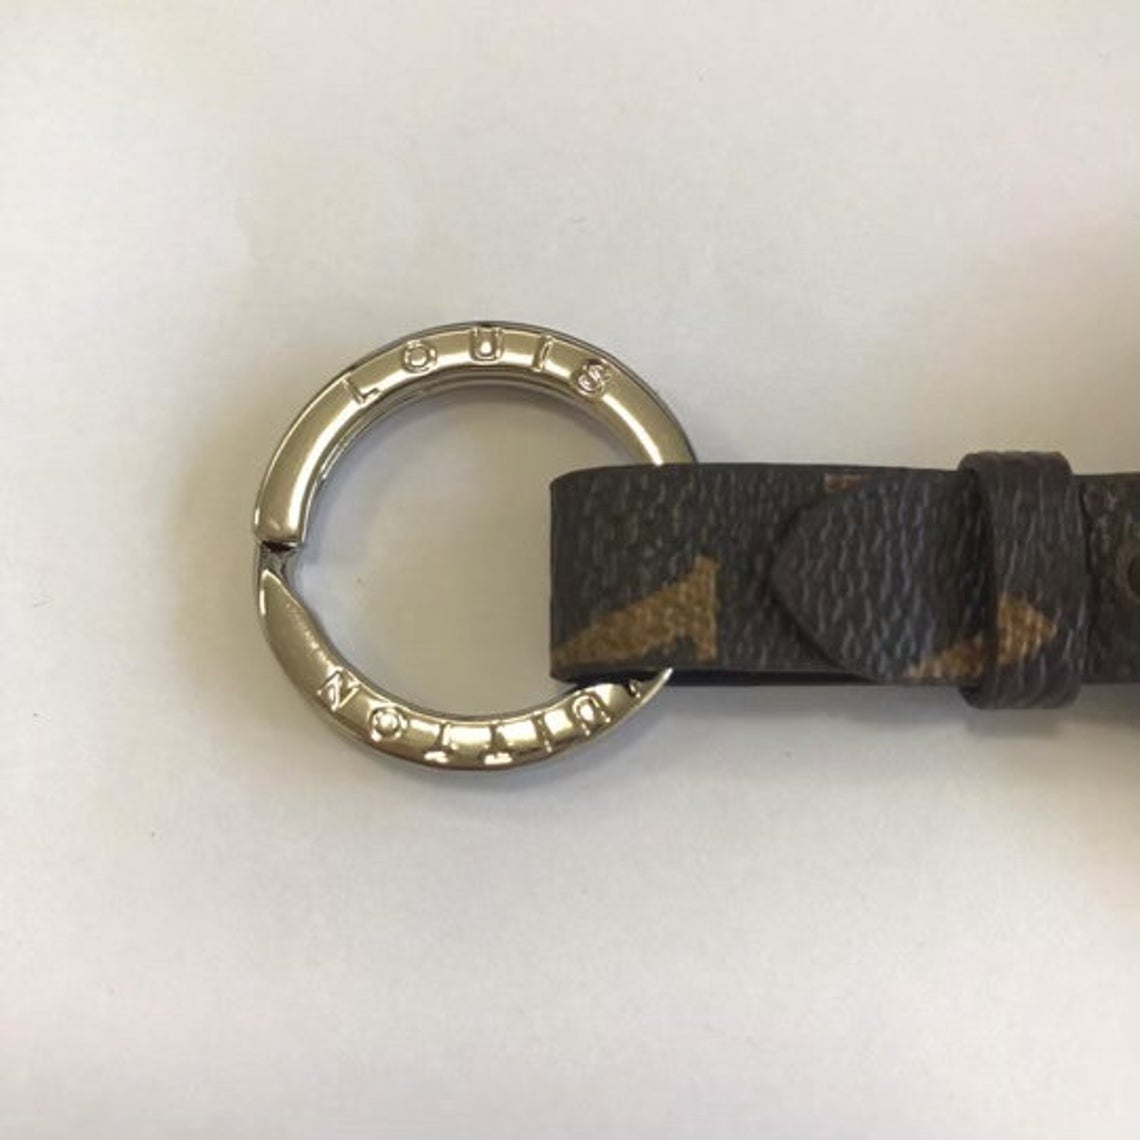 What Is Important Air Tag Keychain And Louis Vuitton Key Holder